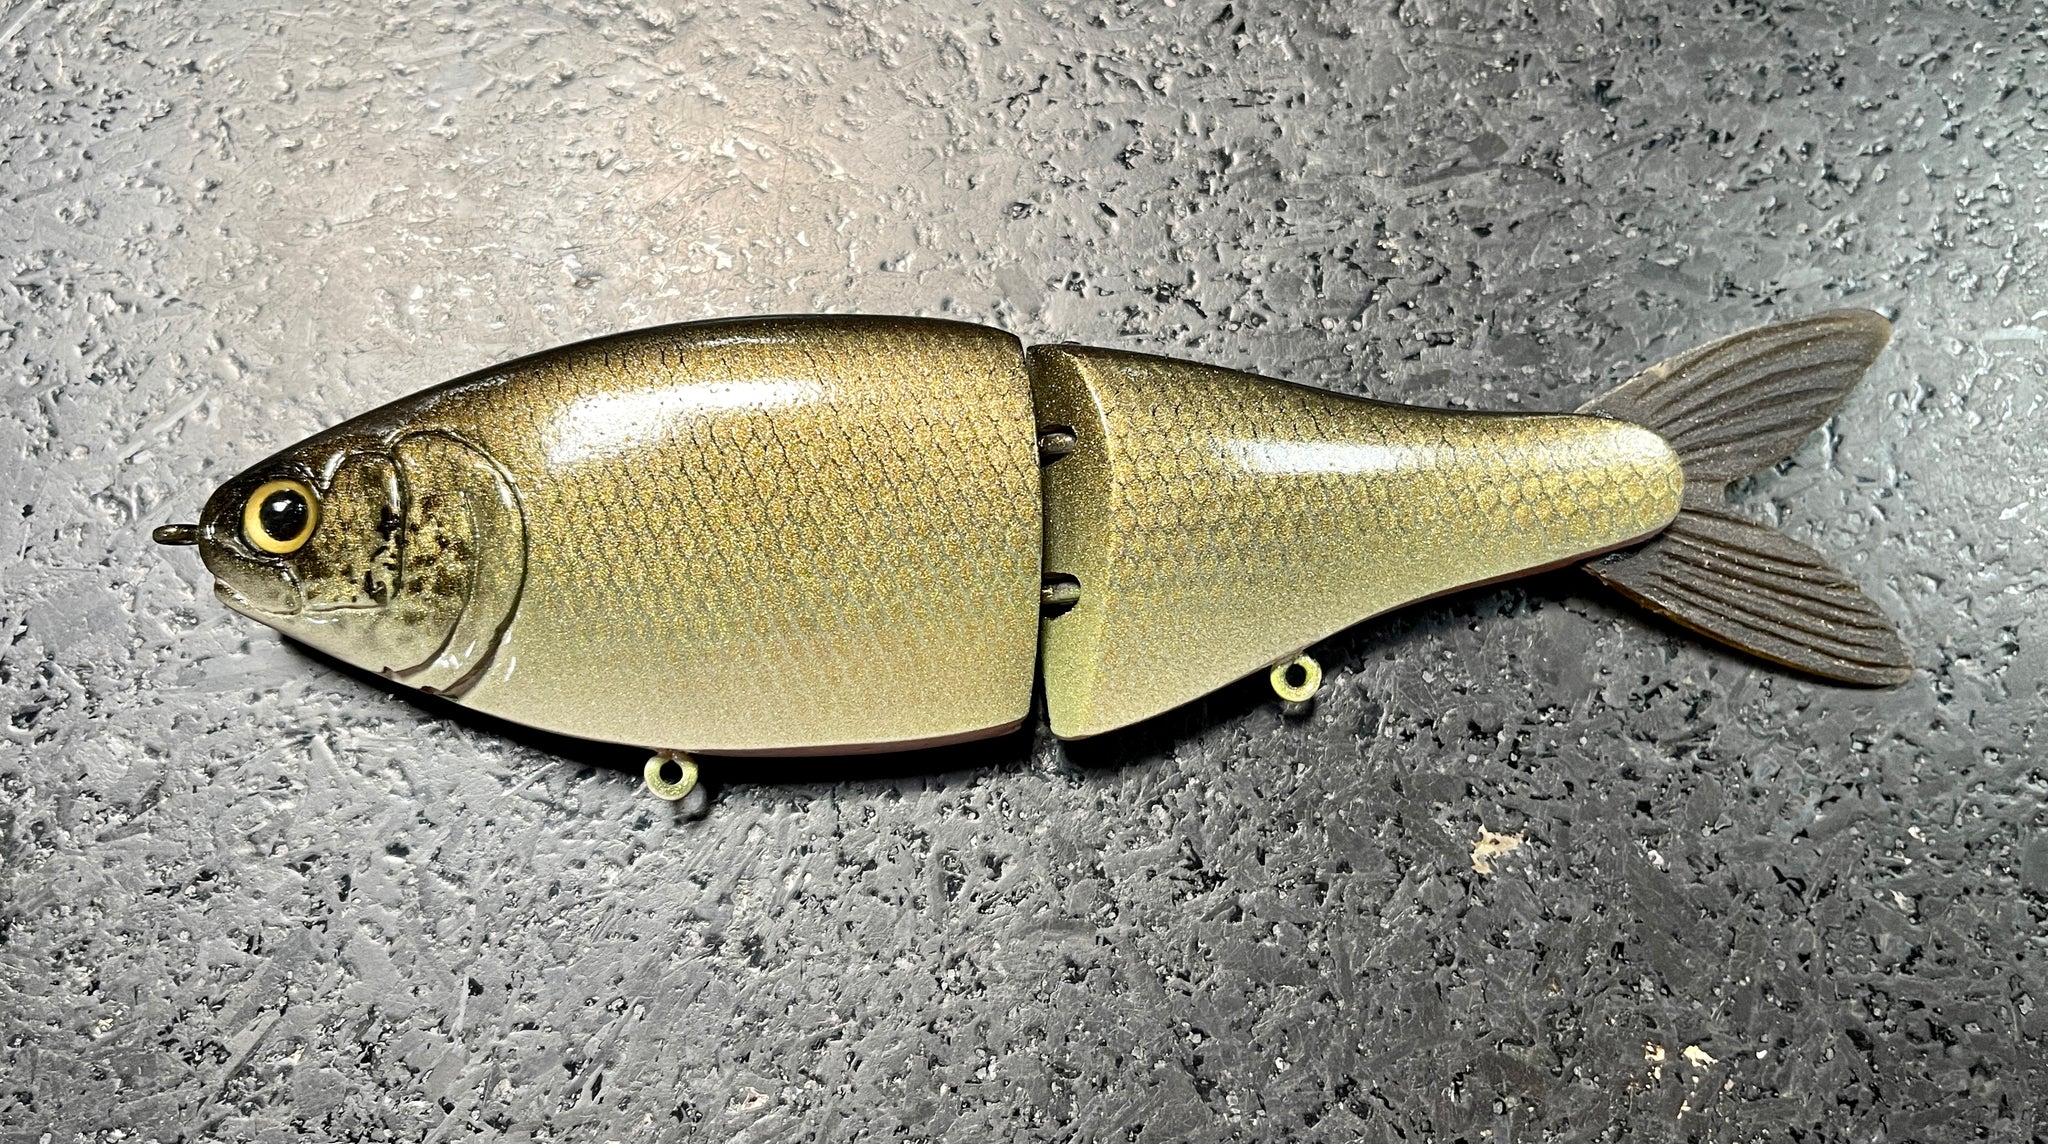 Some 🔥 Joey Shad's return from @rafacustombaits! We just got a fresh  shipment of the Joey Shad in Bone 🦴. This is an 8” 4 oz